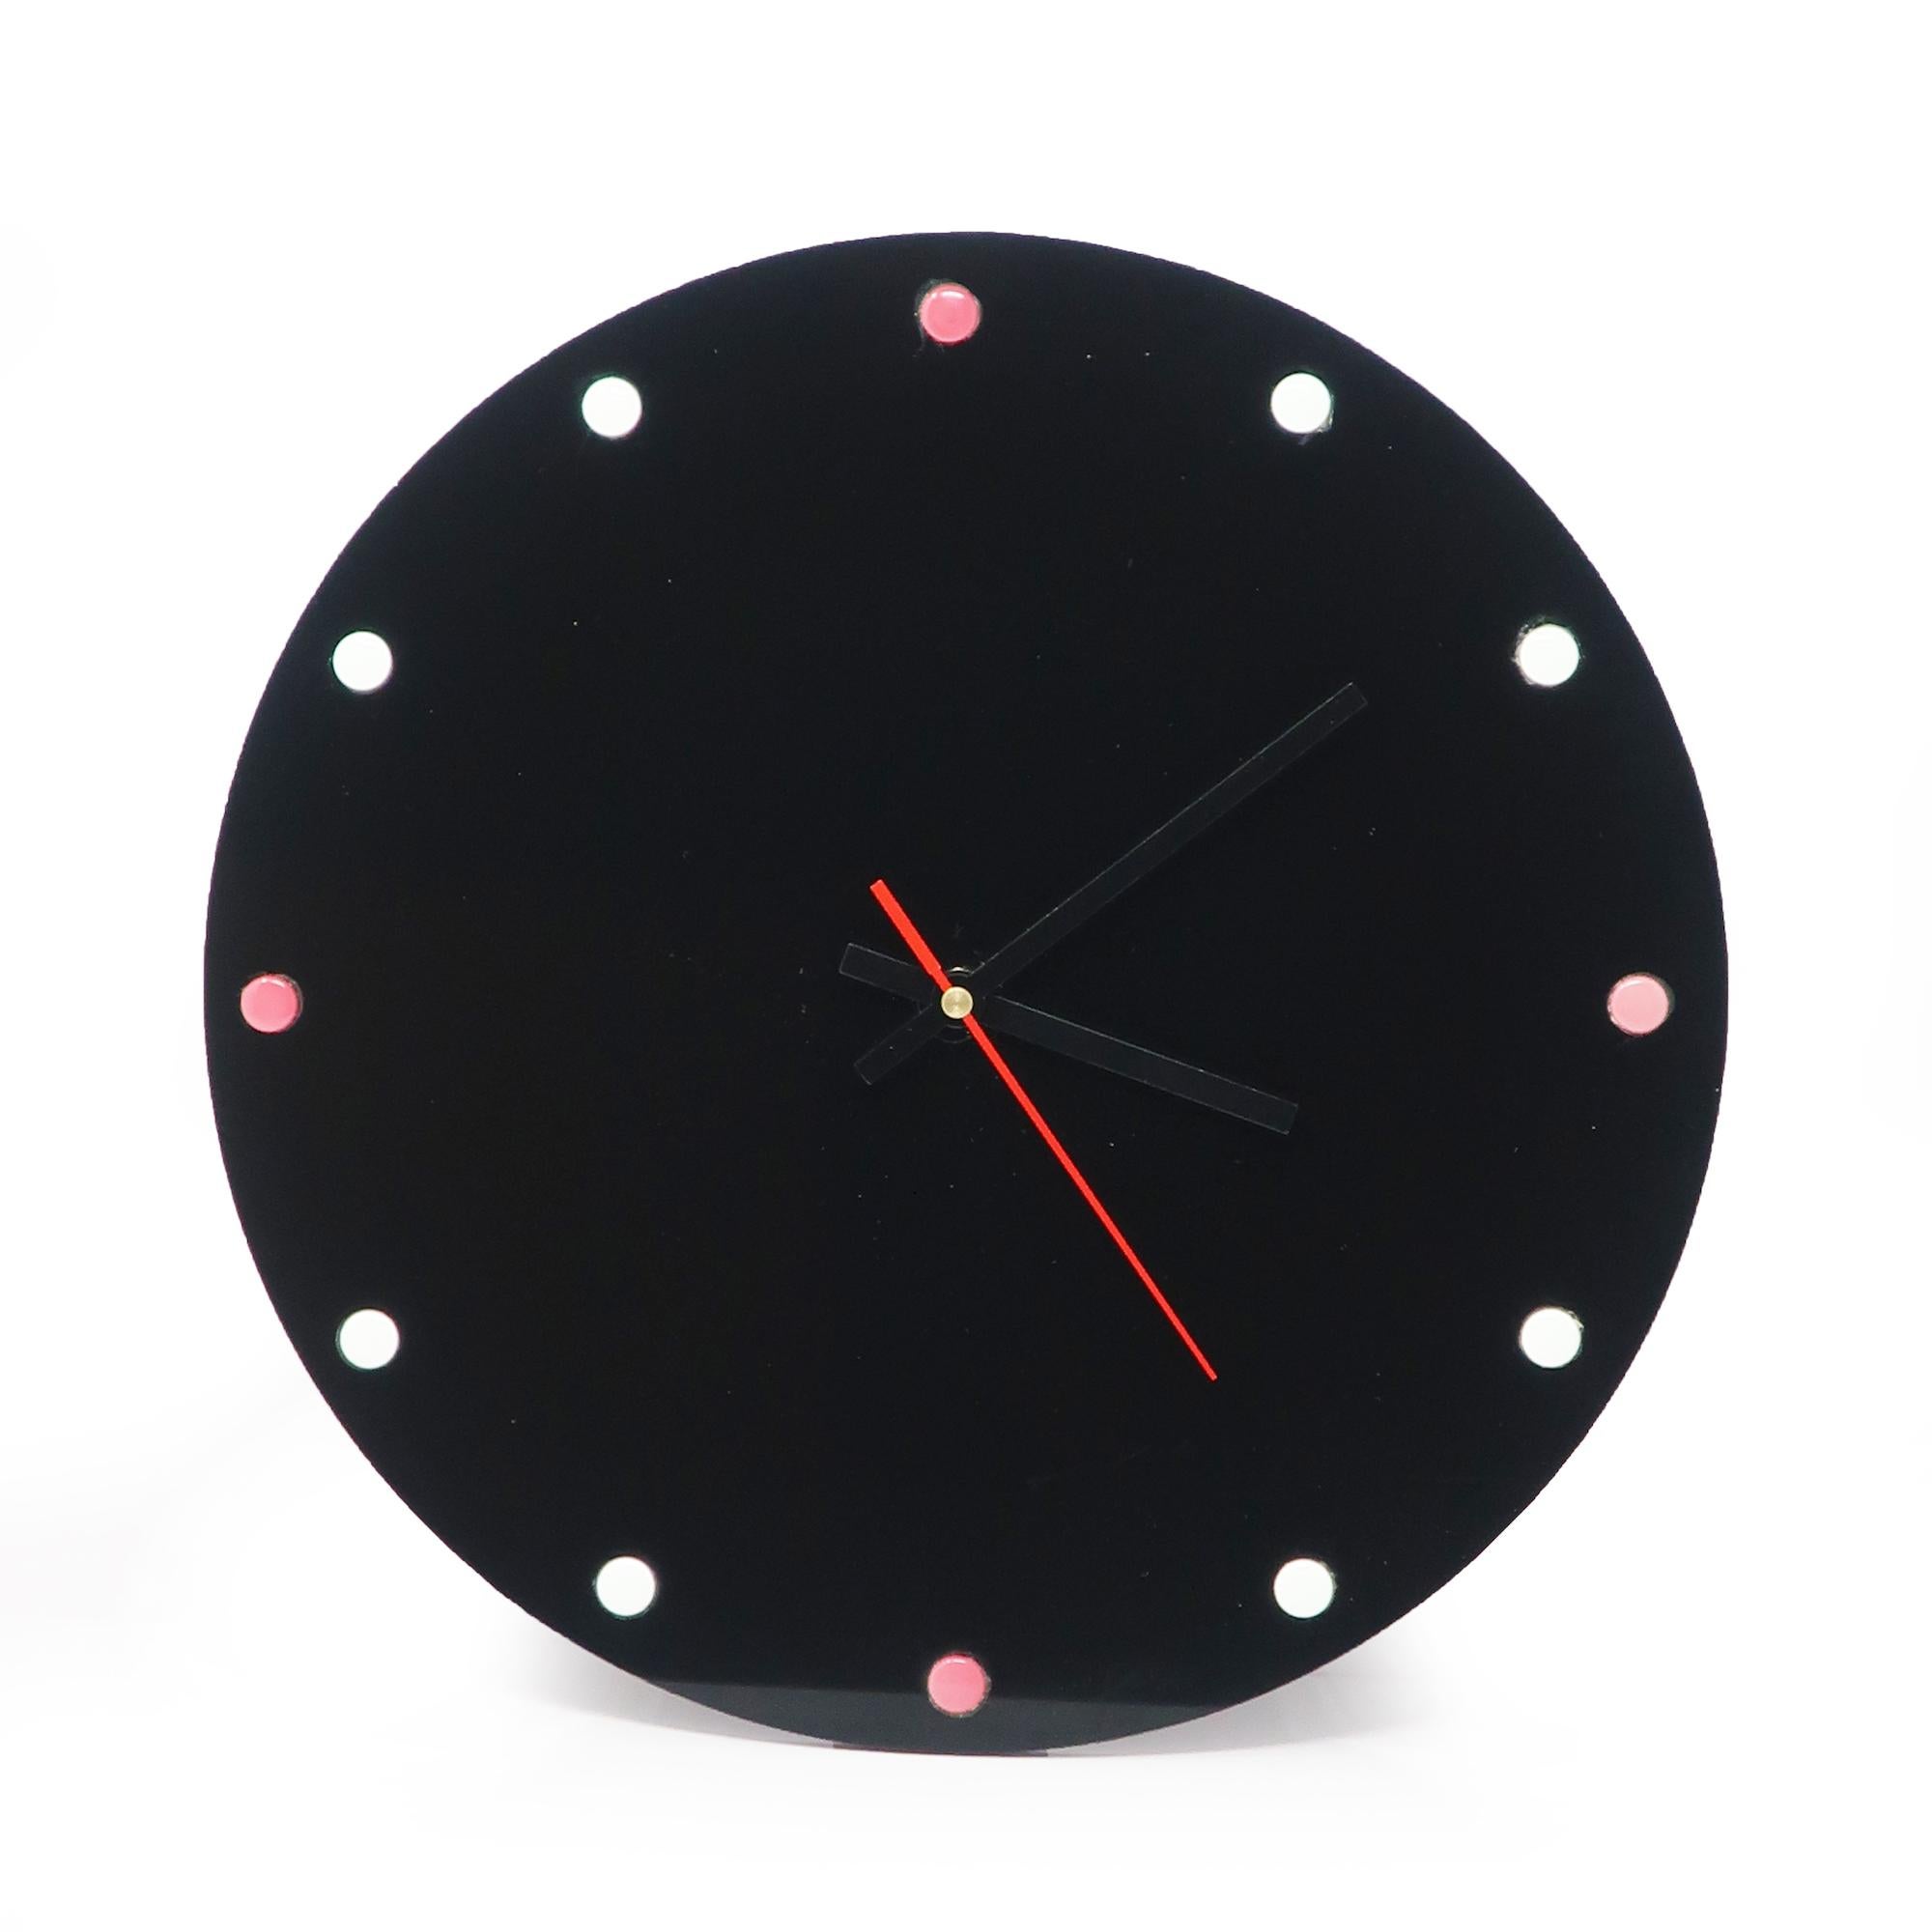 A sophisticated but perficlty simple black lucite wall clock.  Black face, black and red hands, and pink and white dots for numbers.  Minimalism at its finest!

In good vintage condition with wear consistent with age and use.

12